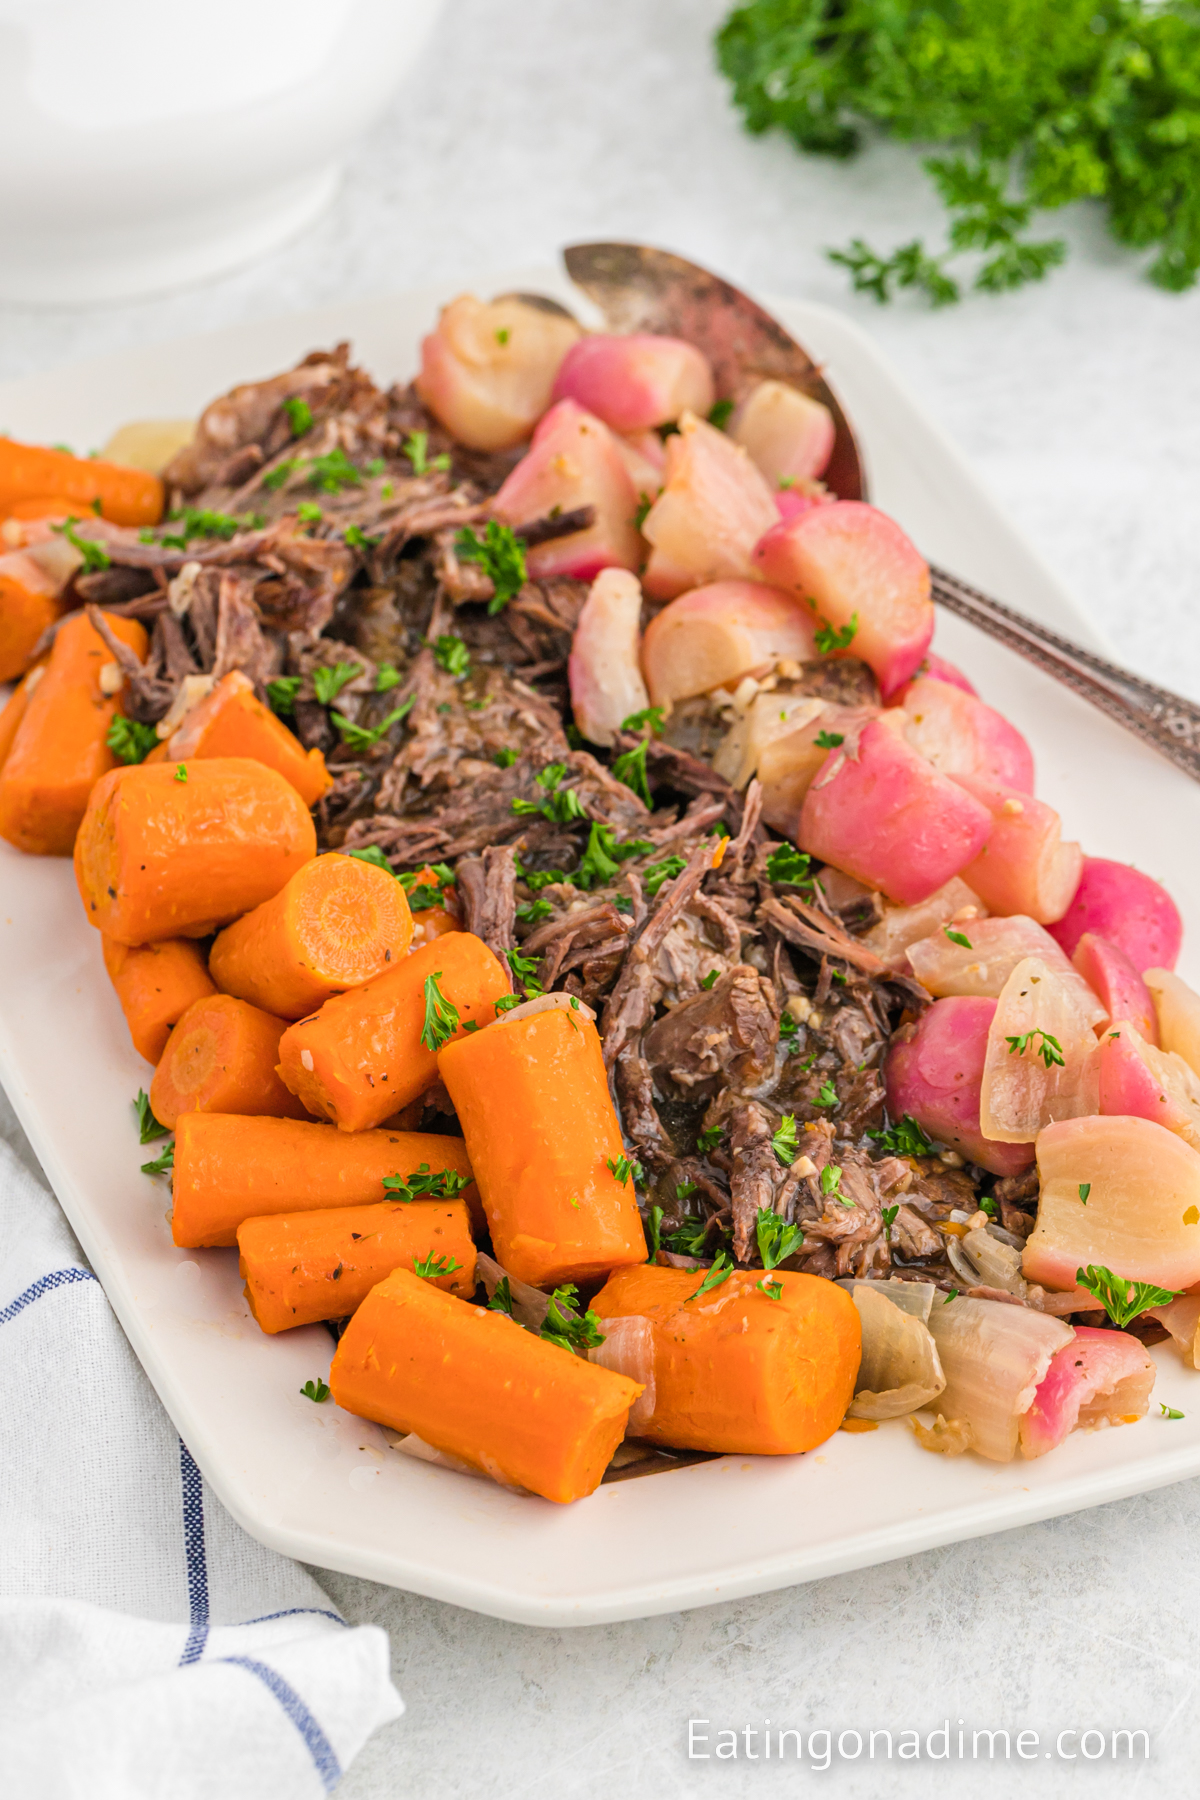 A platter with shredded pot roast, radishes, onions, and carrots